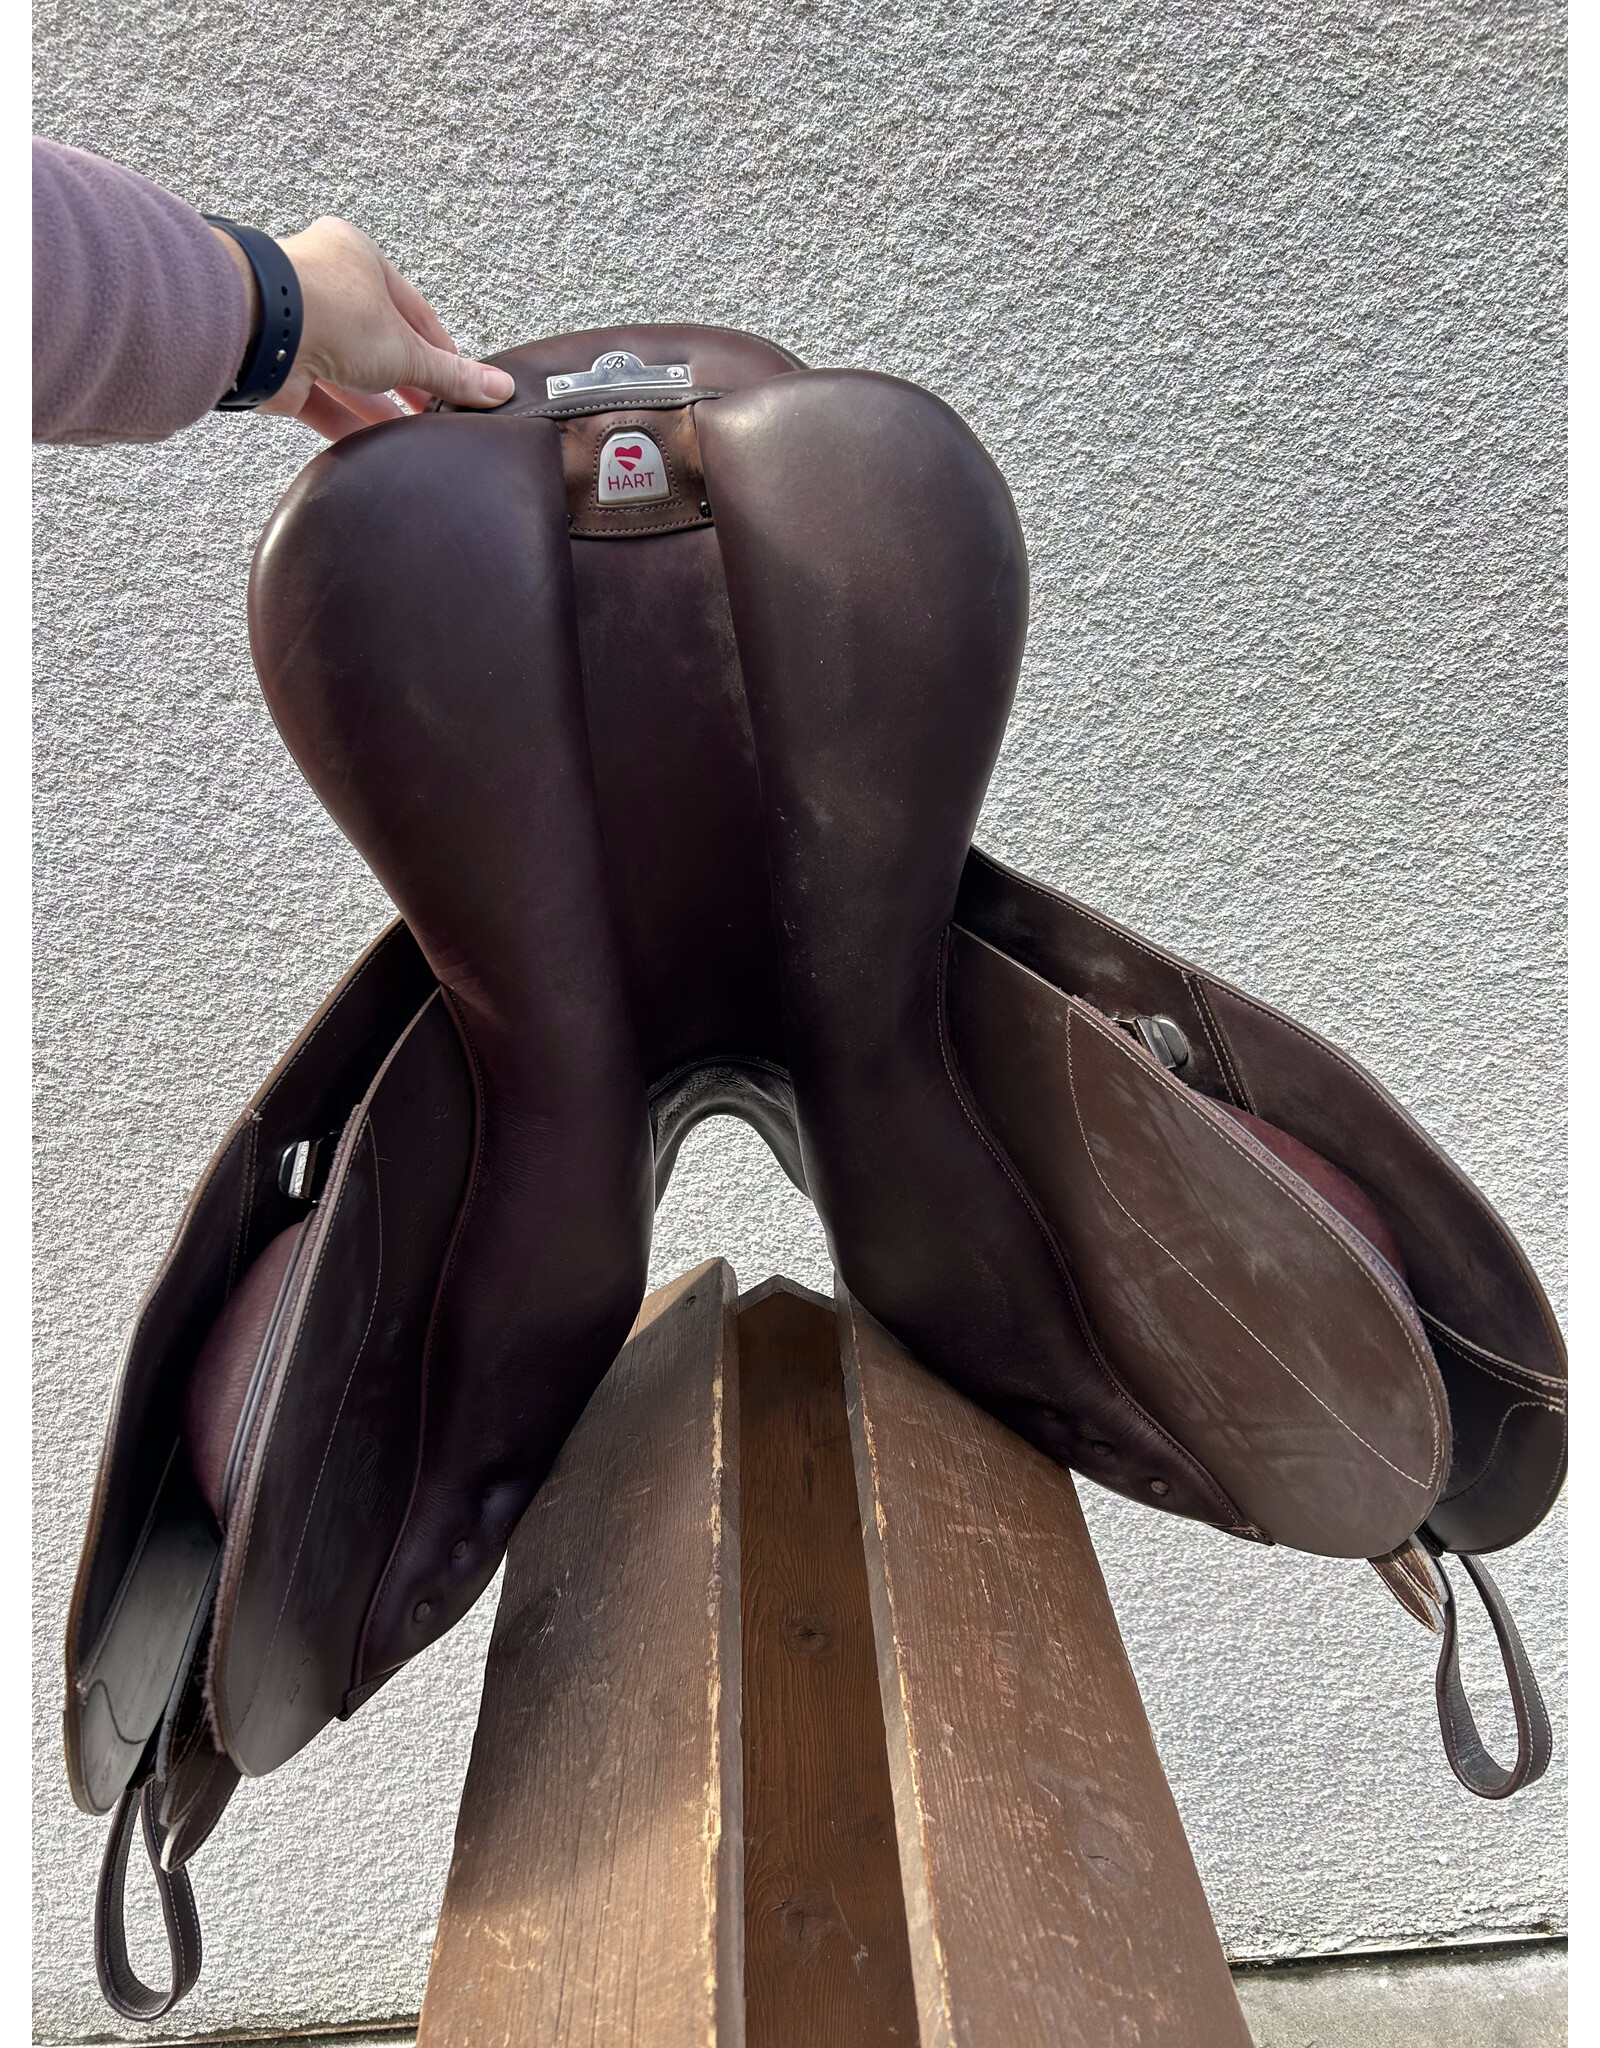 Bates Elevation Jump Saddle with CAIR, Havana/Brown, 17.5", soft & grippy luxe leather, Easy-Change Fit Solution Medium Gullet Installed, Schockemole 50" leathers + bates saddle cover